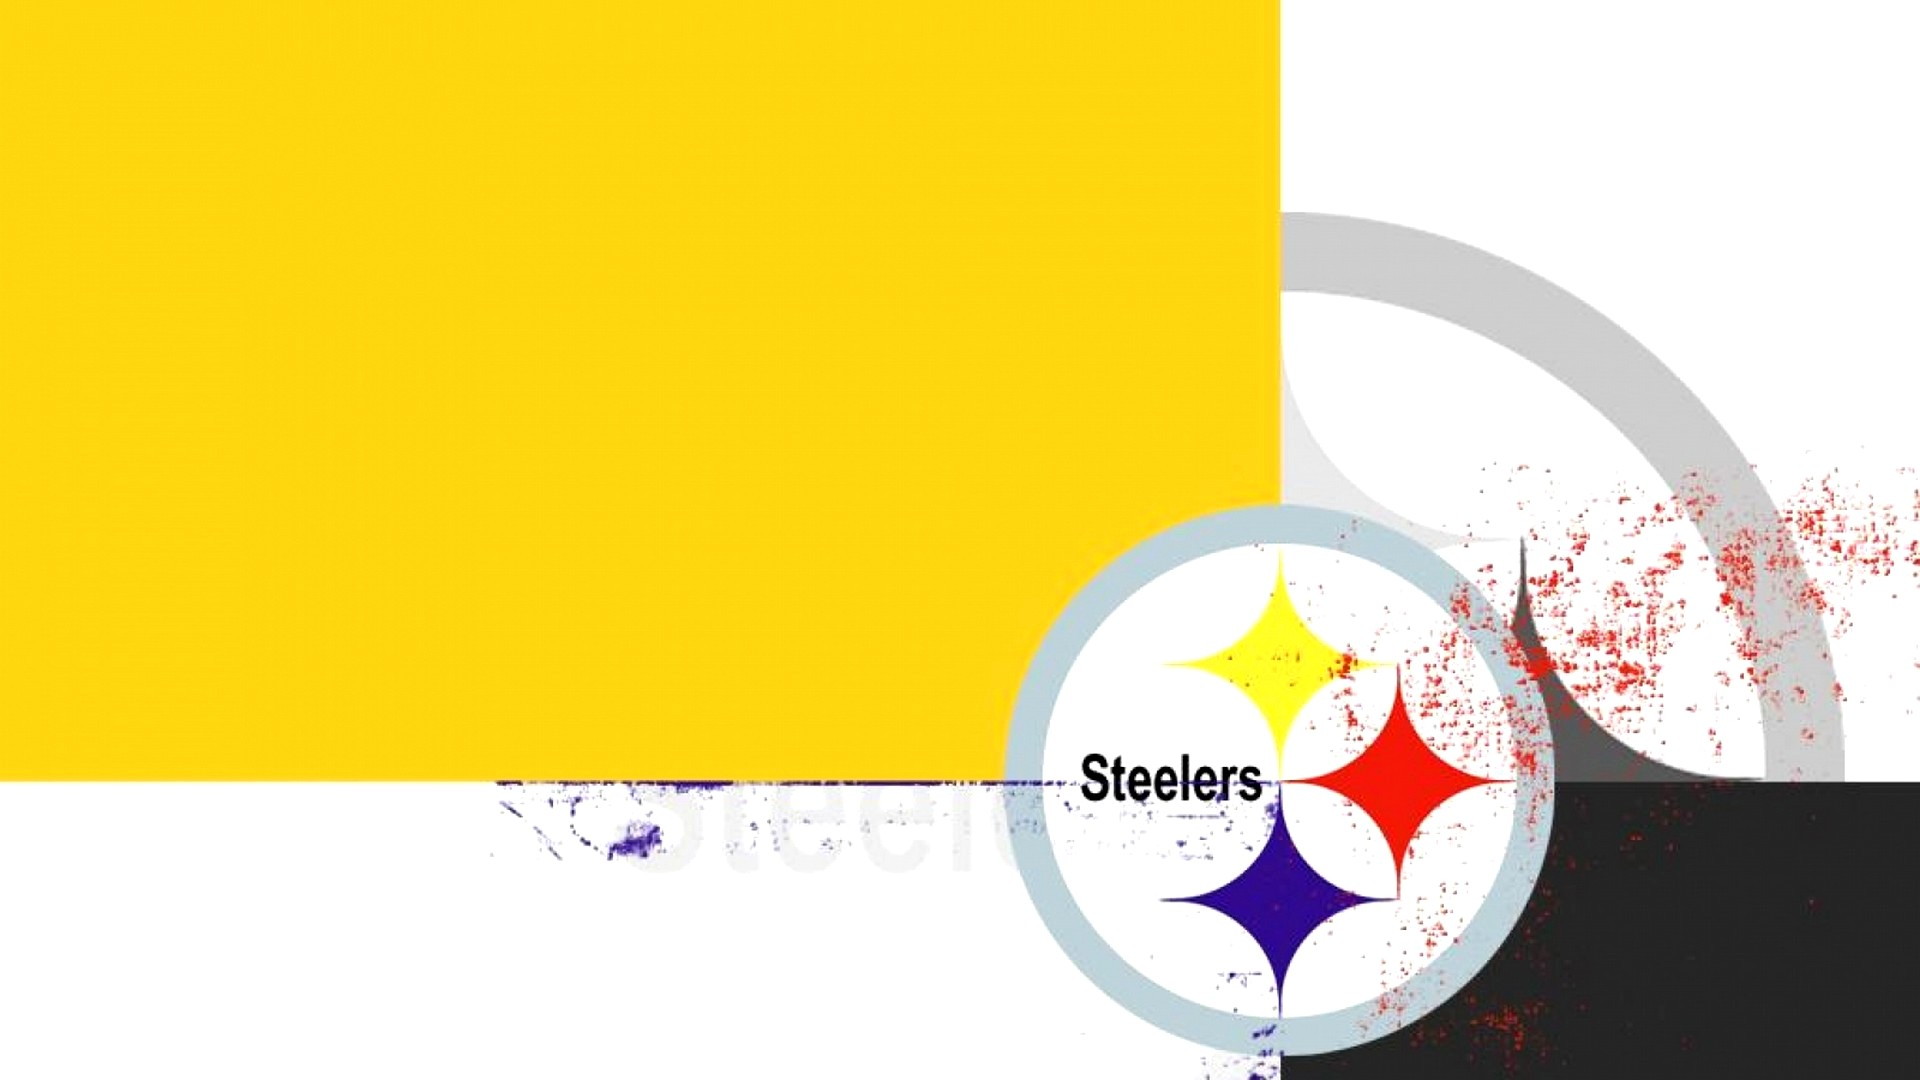 Steelers Macbook Backgrounds with high-resolution 1920x1080 pixel. You can use and set as wallpaper for Notebook Screensavers, Mac Wallpapers, Mobile Home Screen, iPhone or Android Phones Lock Screen